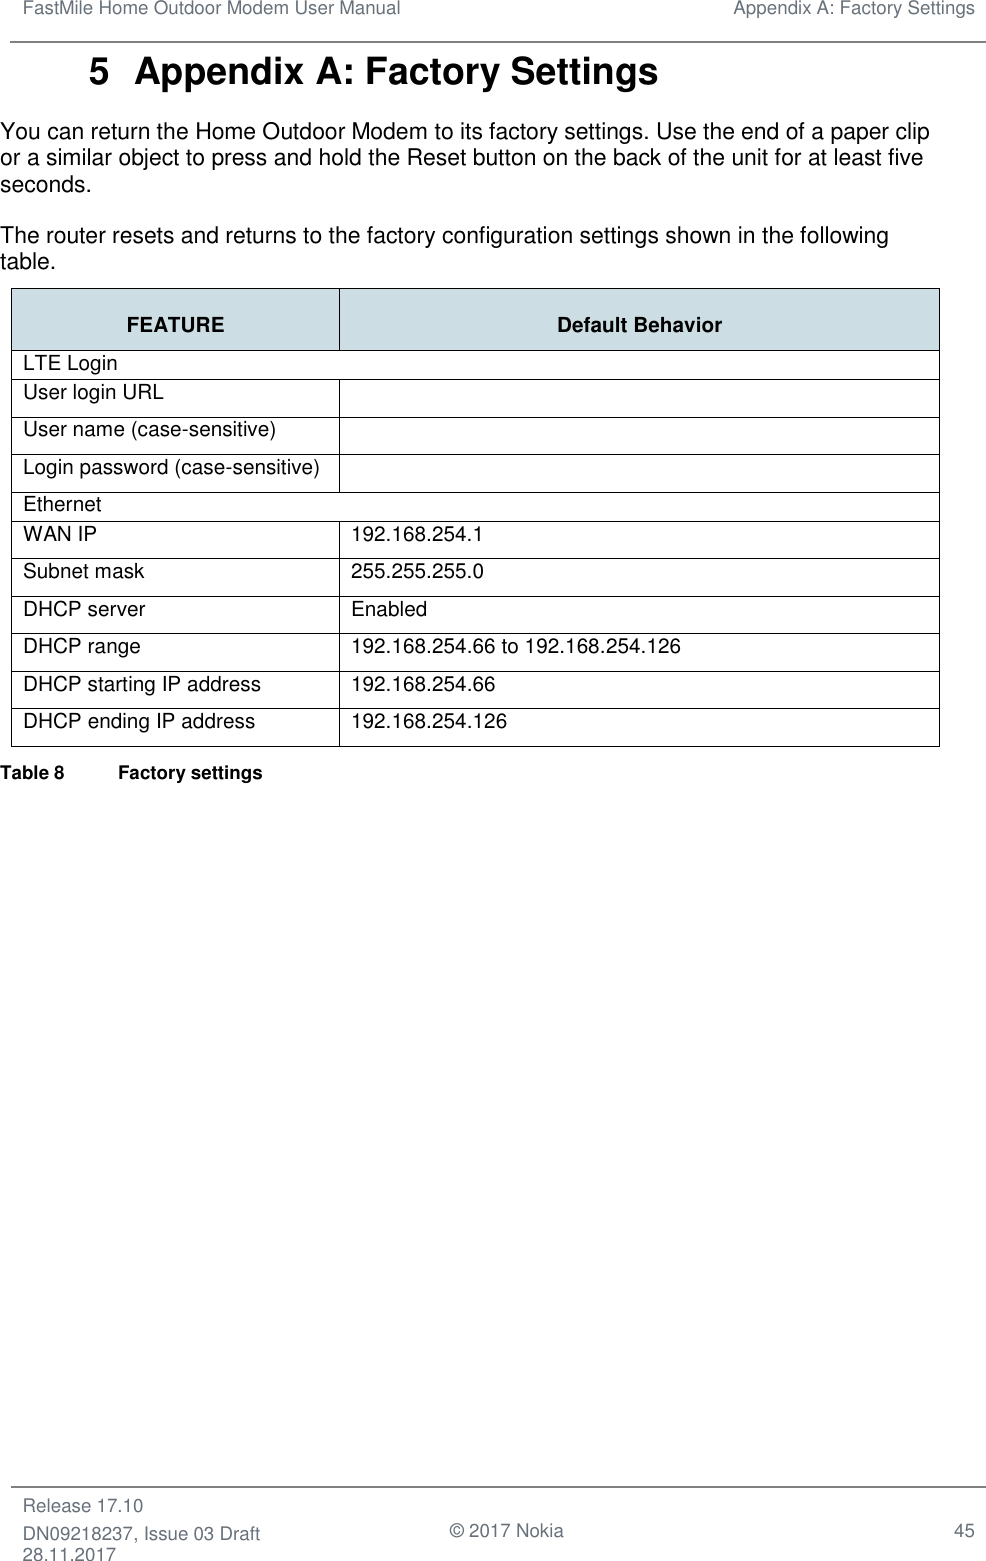 FastMile Home Outdoor Modem User Manual Appendix A: Factory Settings  Release 17.10 DN09218237, Issue 03 Draft 28.11.2017                                © 2017 Nokia 45  5  Appendix A: Factory Settings You can return the Home Outdoor Modem to its factory settings. Use the end of a paper clip or a similar object to press and hold the Reset button on the back of the unit for at least five seconds.  The router resets and returns to the factory configuration settings shown in the following table. FEATURE Default Behavior LTE Login User login URL  User name (case-sensitive)  Login password (case-sensitive)  Ethernet WAN IP  192.168.254.1 Subnet mask  255.255.255.0 DHCP server  Enabled DHCP range  192.168.254.66 to 192.168.254.126 DHCP starting IP address  192.168.254.66 DHCP ending IP address  192.168.254.126 Table 8  Factory settings    